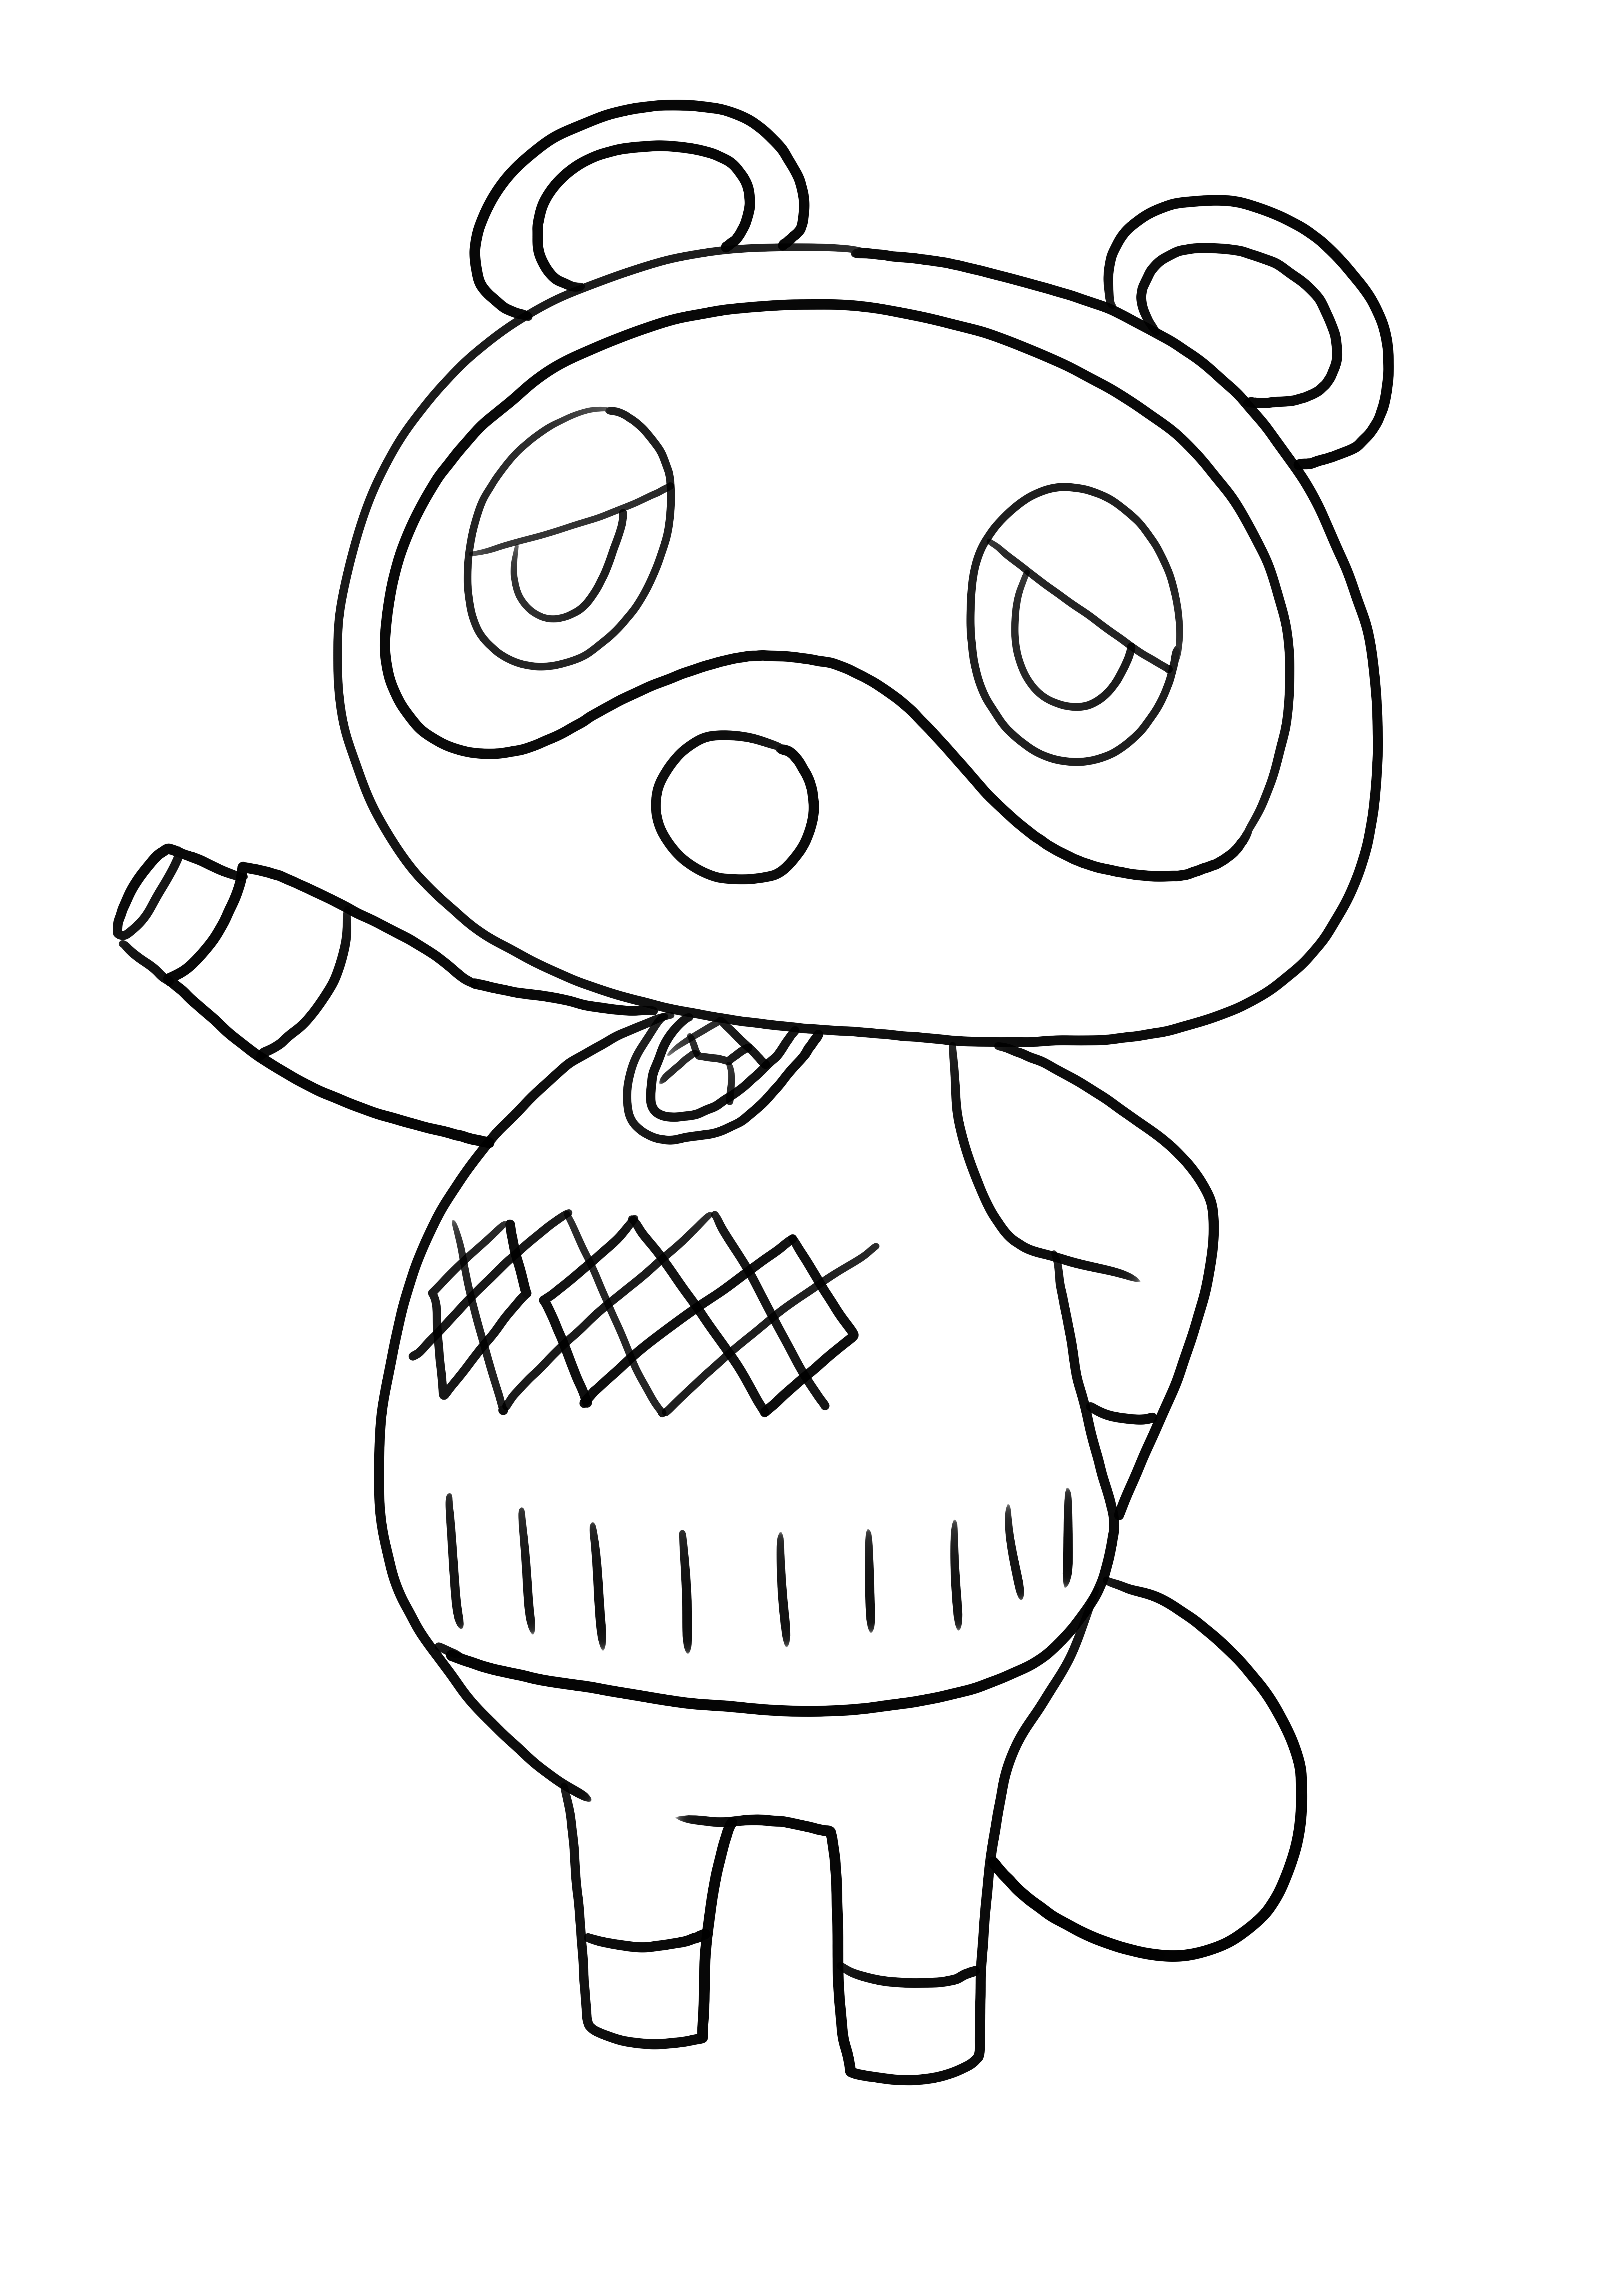 Drawing of Tom Nook from Animal Crossing to print and color